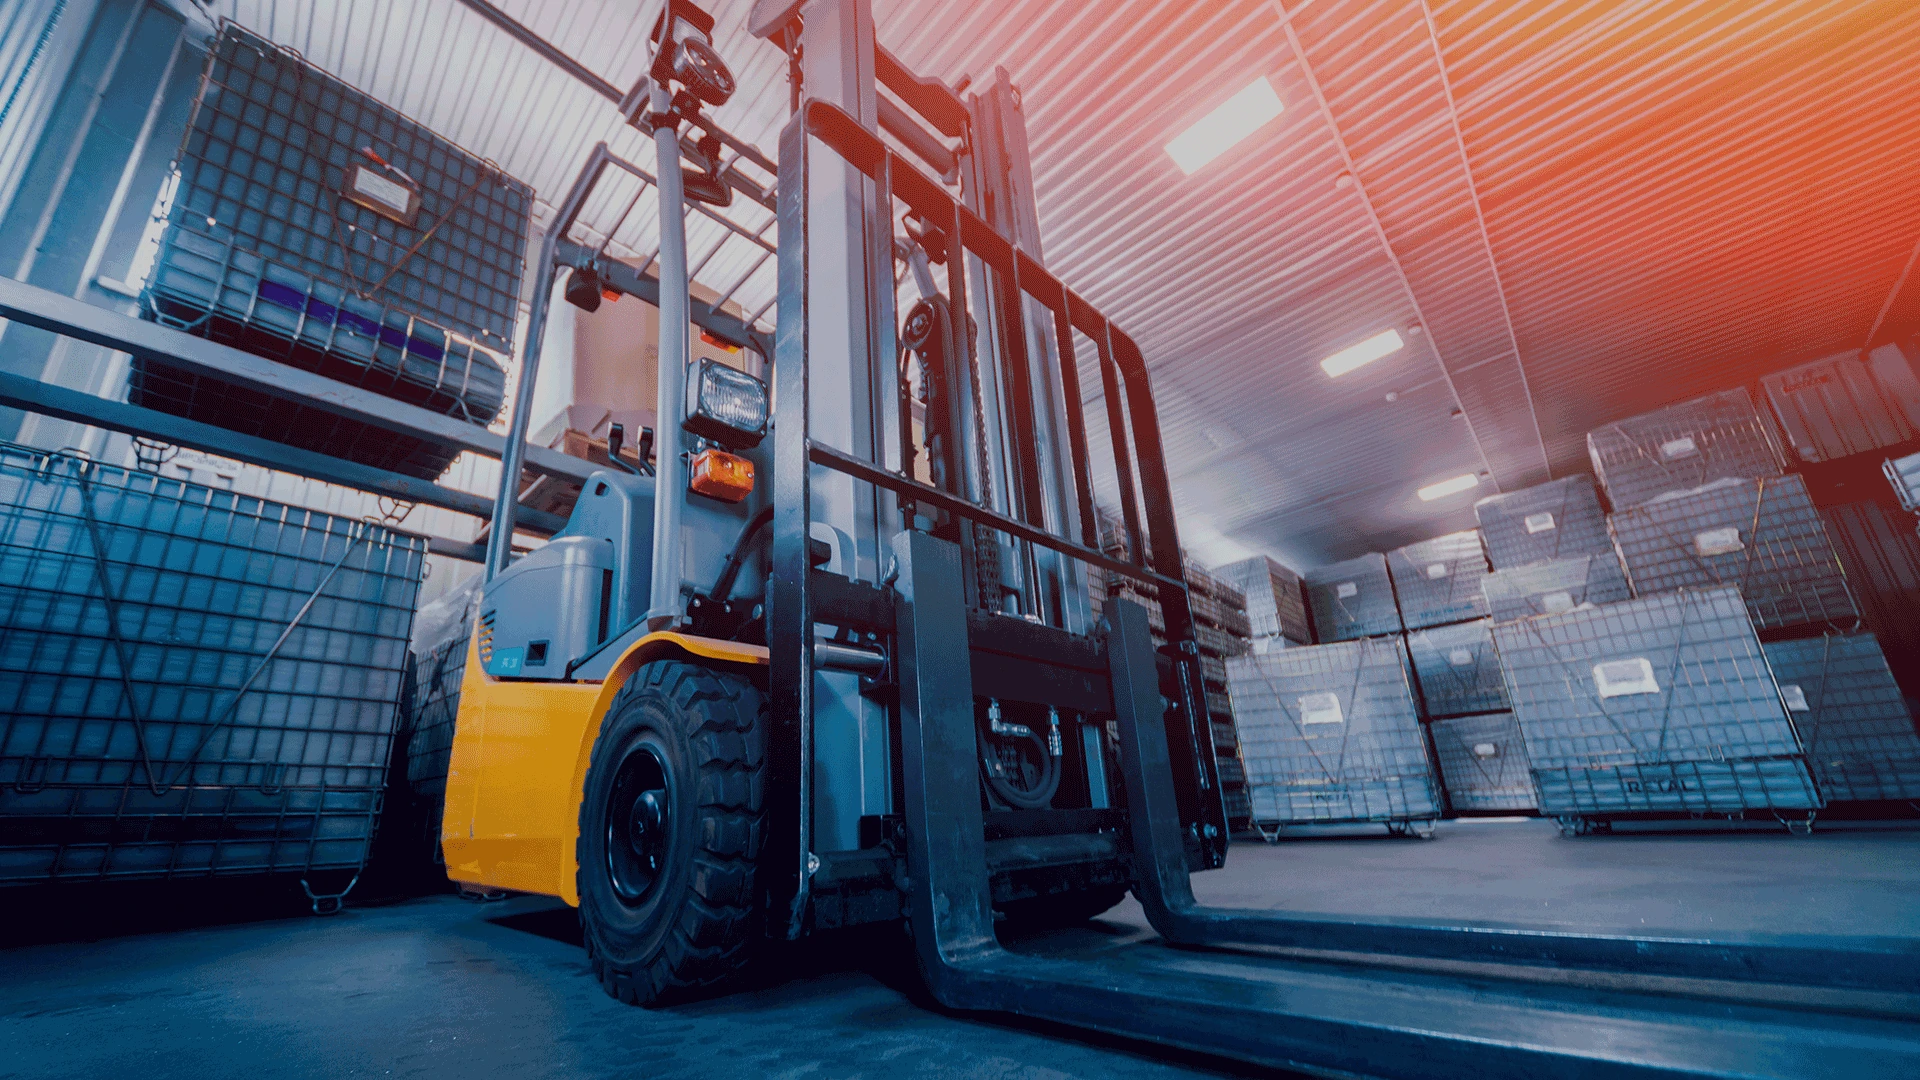 Close up of a yellow forklift in a warehouse environment